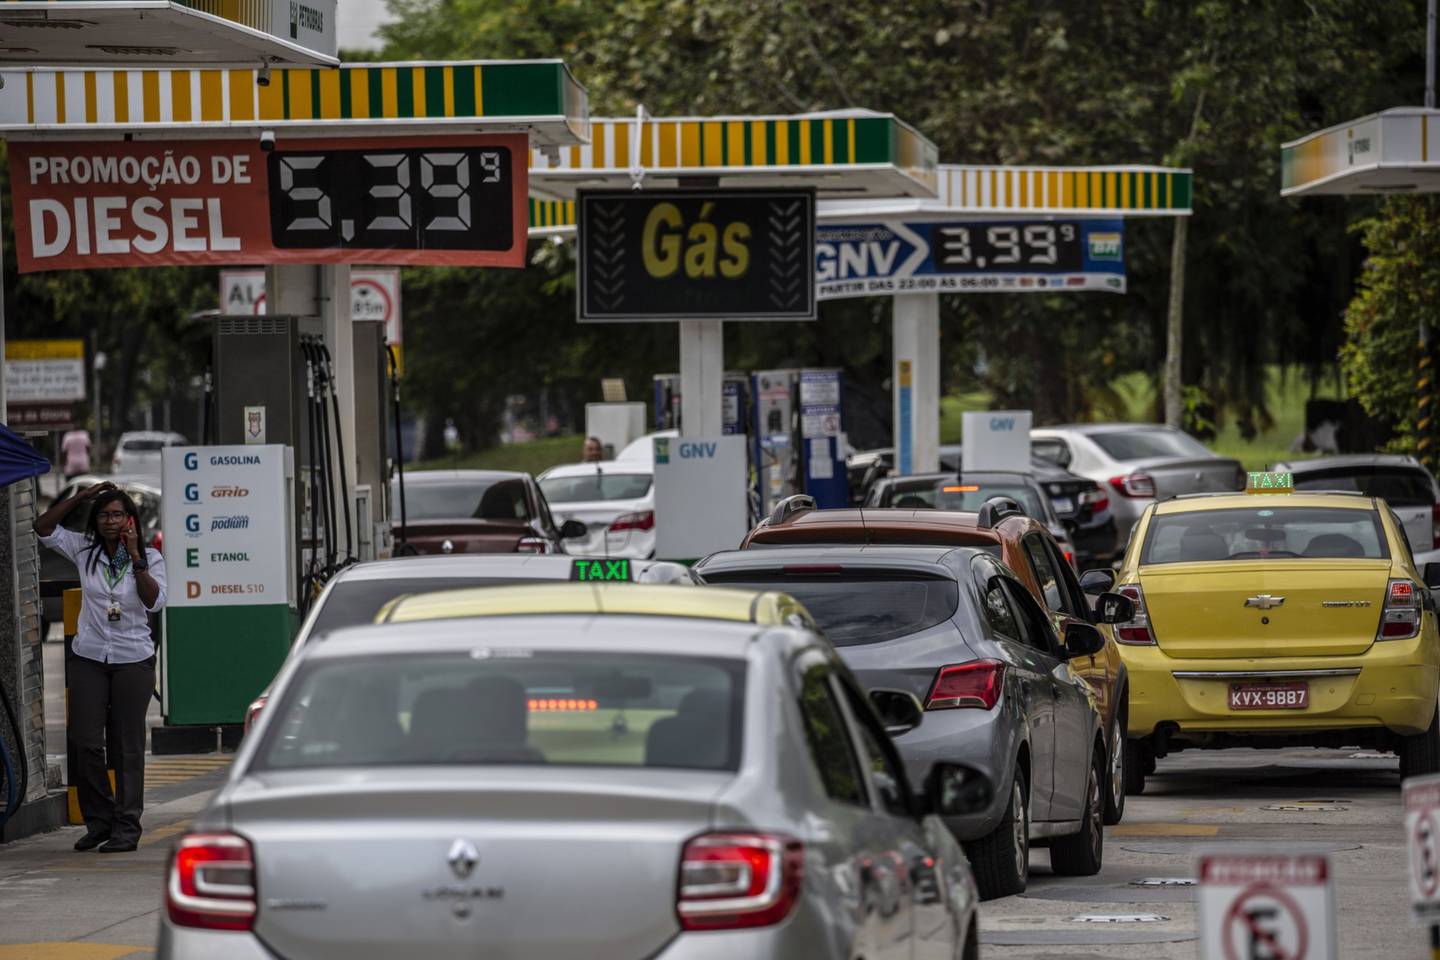 Vehicles wait in line at a Petrobras gas station in Rio de Janeiro, Brazil, on Thursday, Oct. 21, 2021.